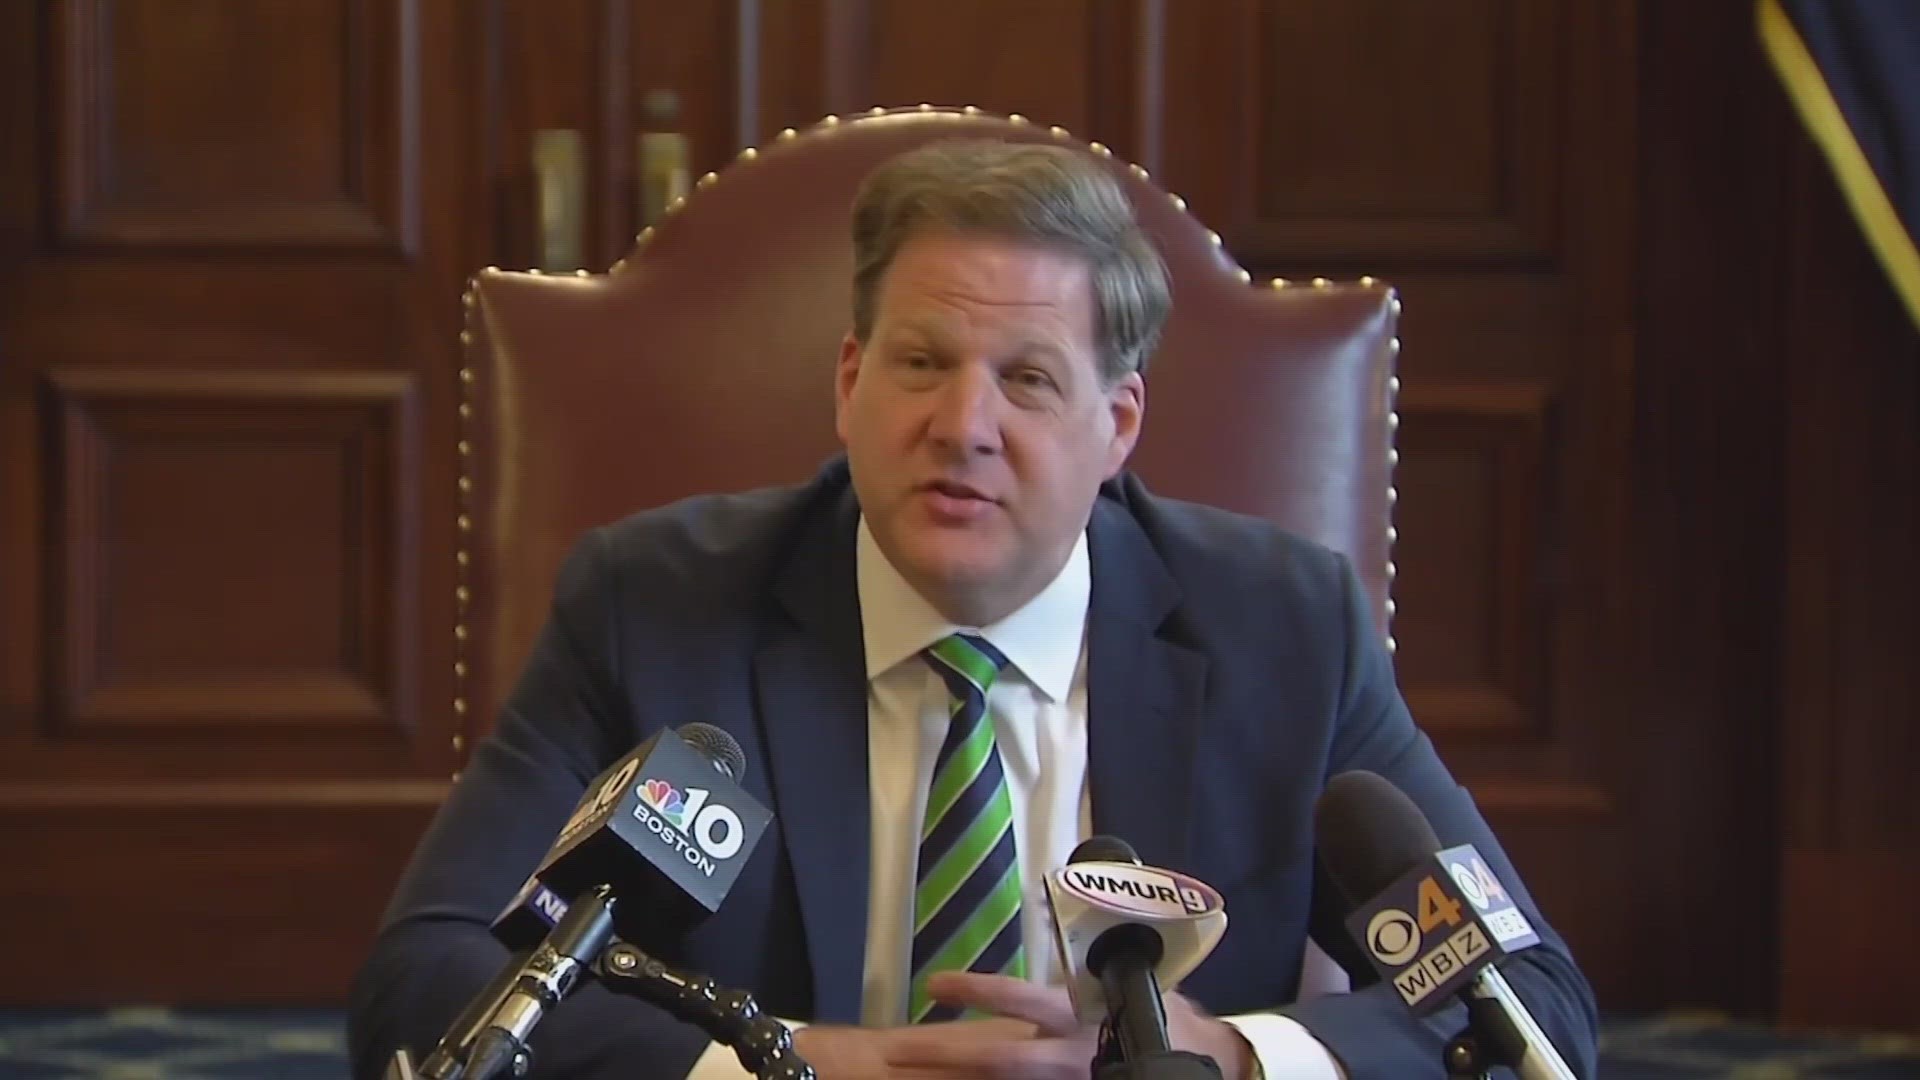 Gov. Chris Sununu was among a small group of Republican officials still openly contemplating a presidential bid.